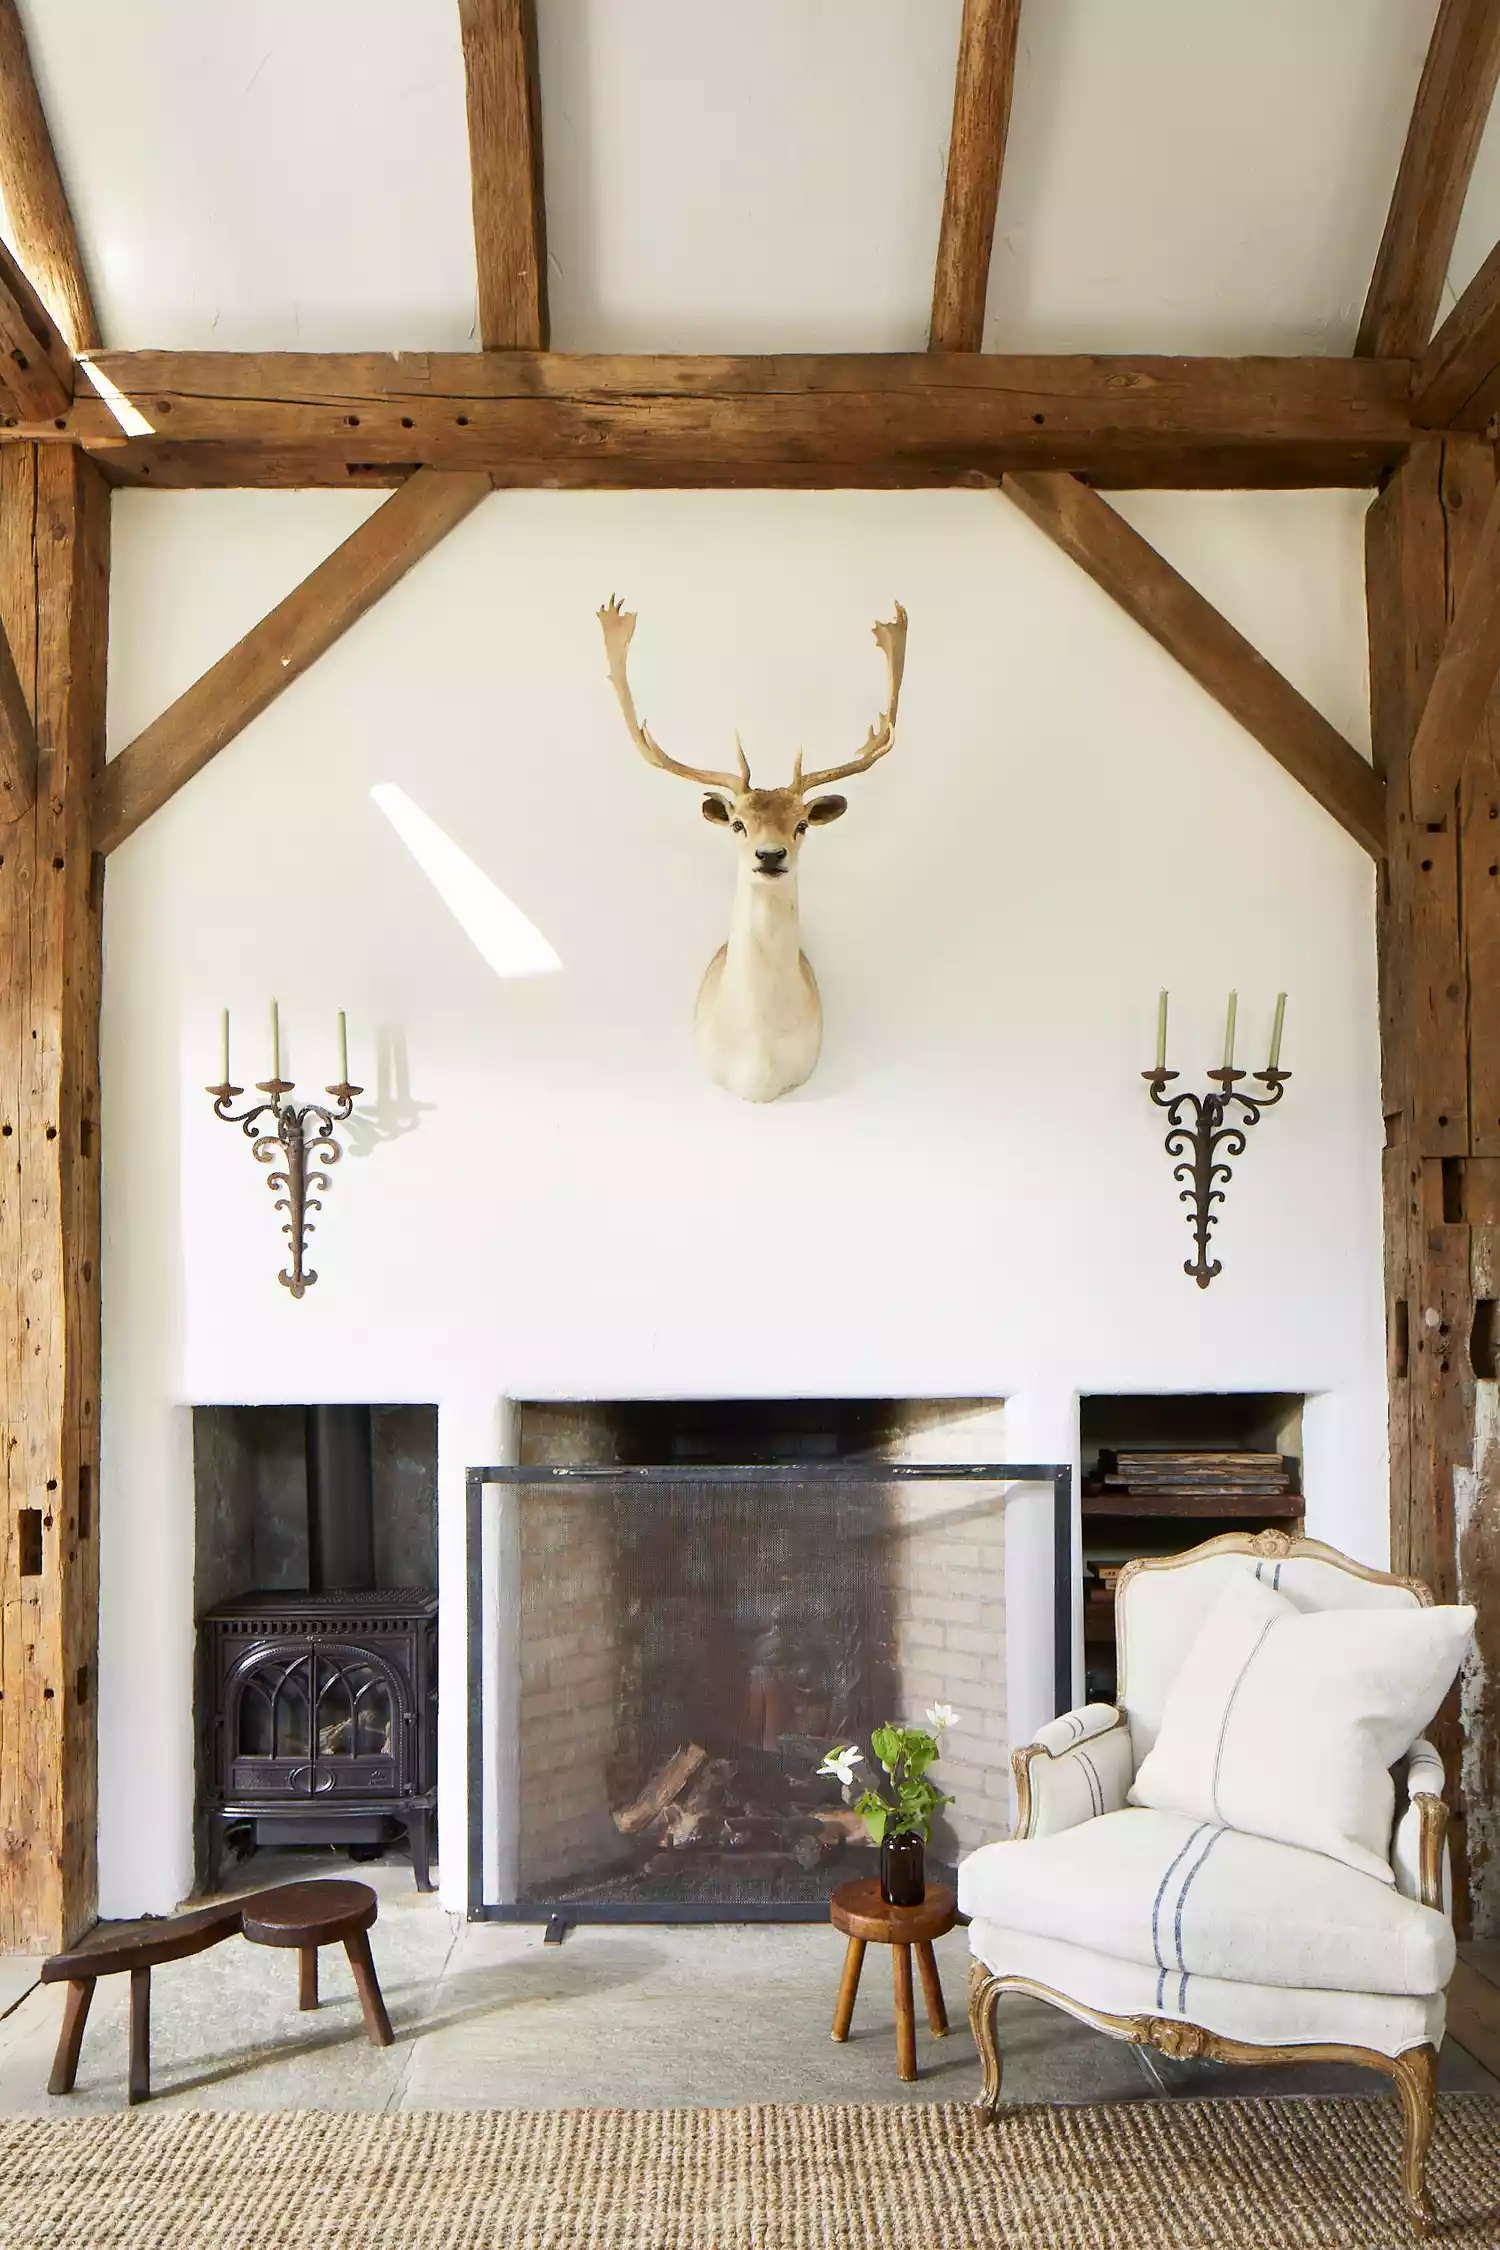 fireplace with stag head above mantel